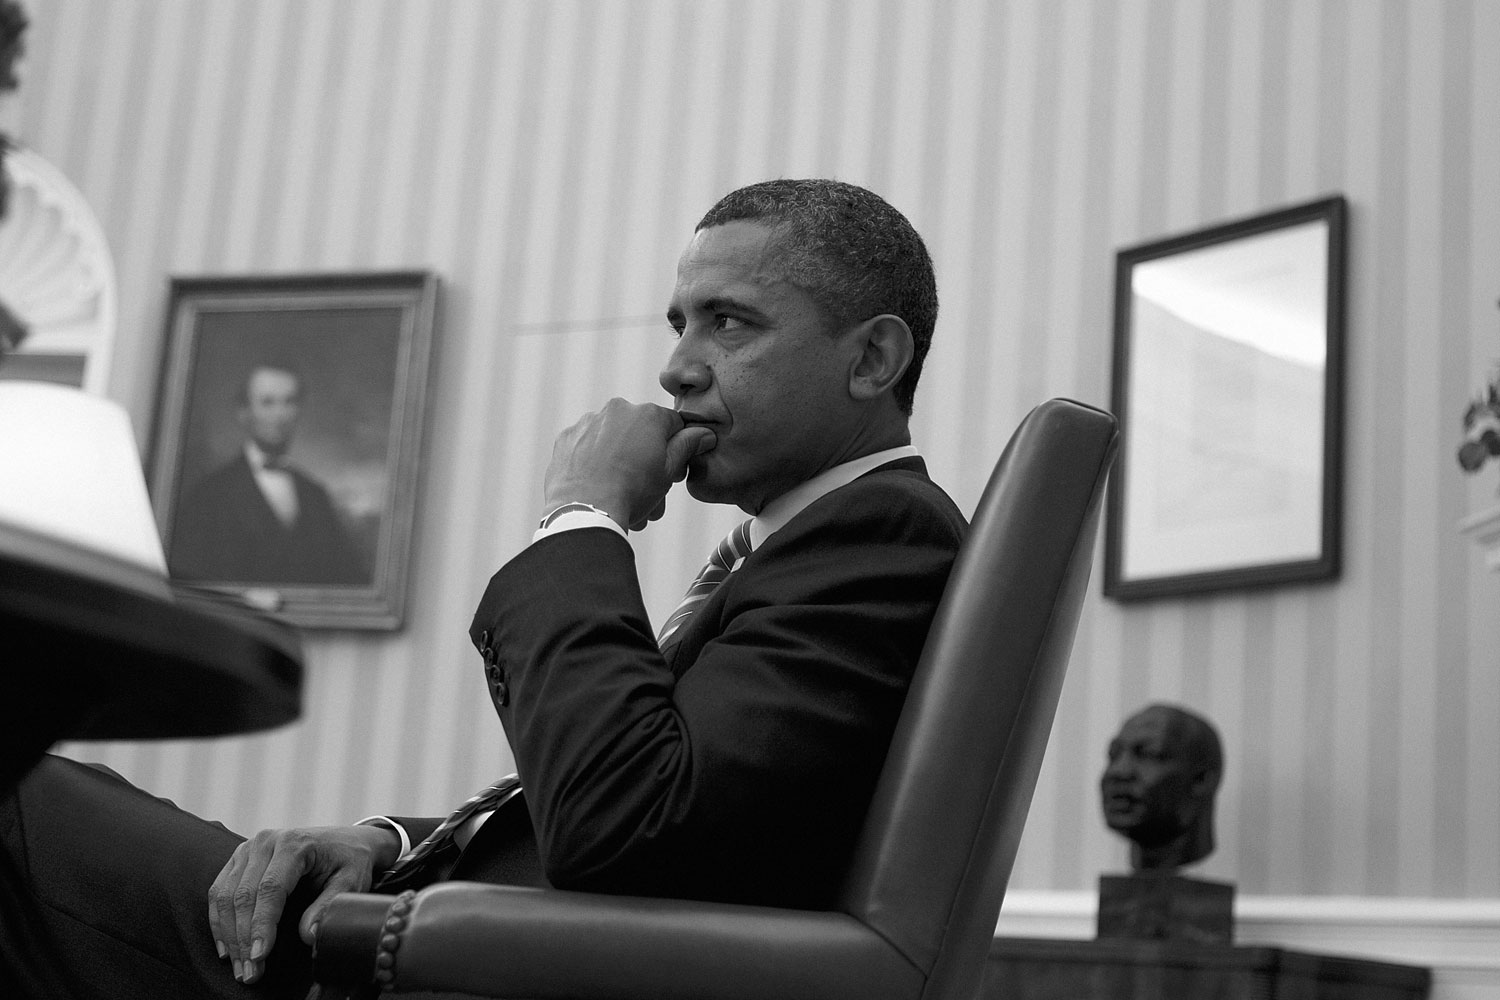 January 17, 2012. Obama sits in the Oval Office during a meeting with senior advisers.